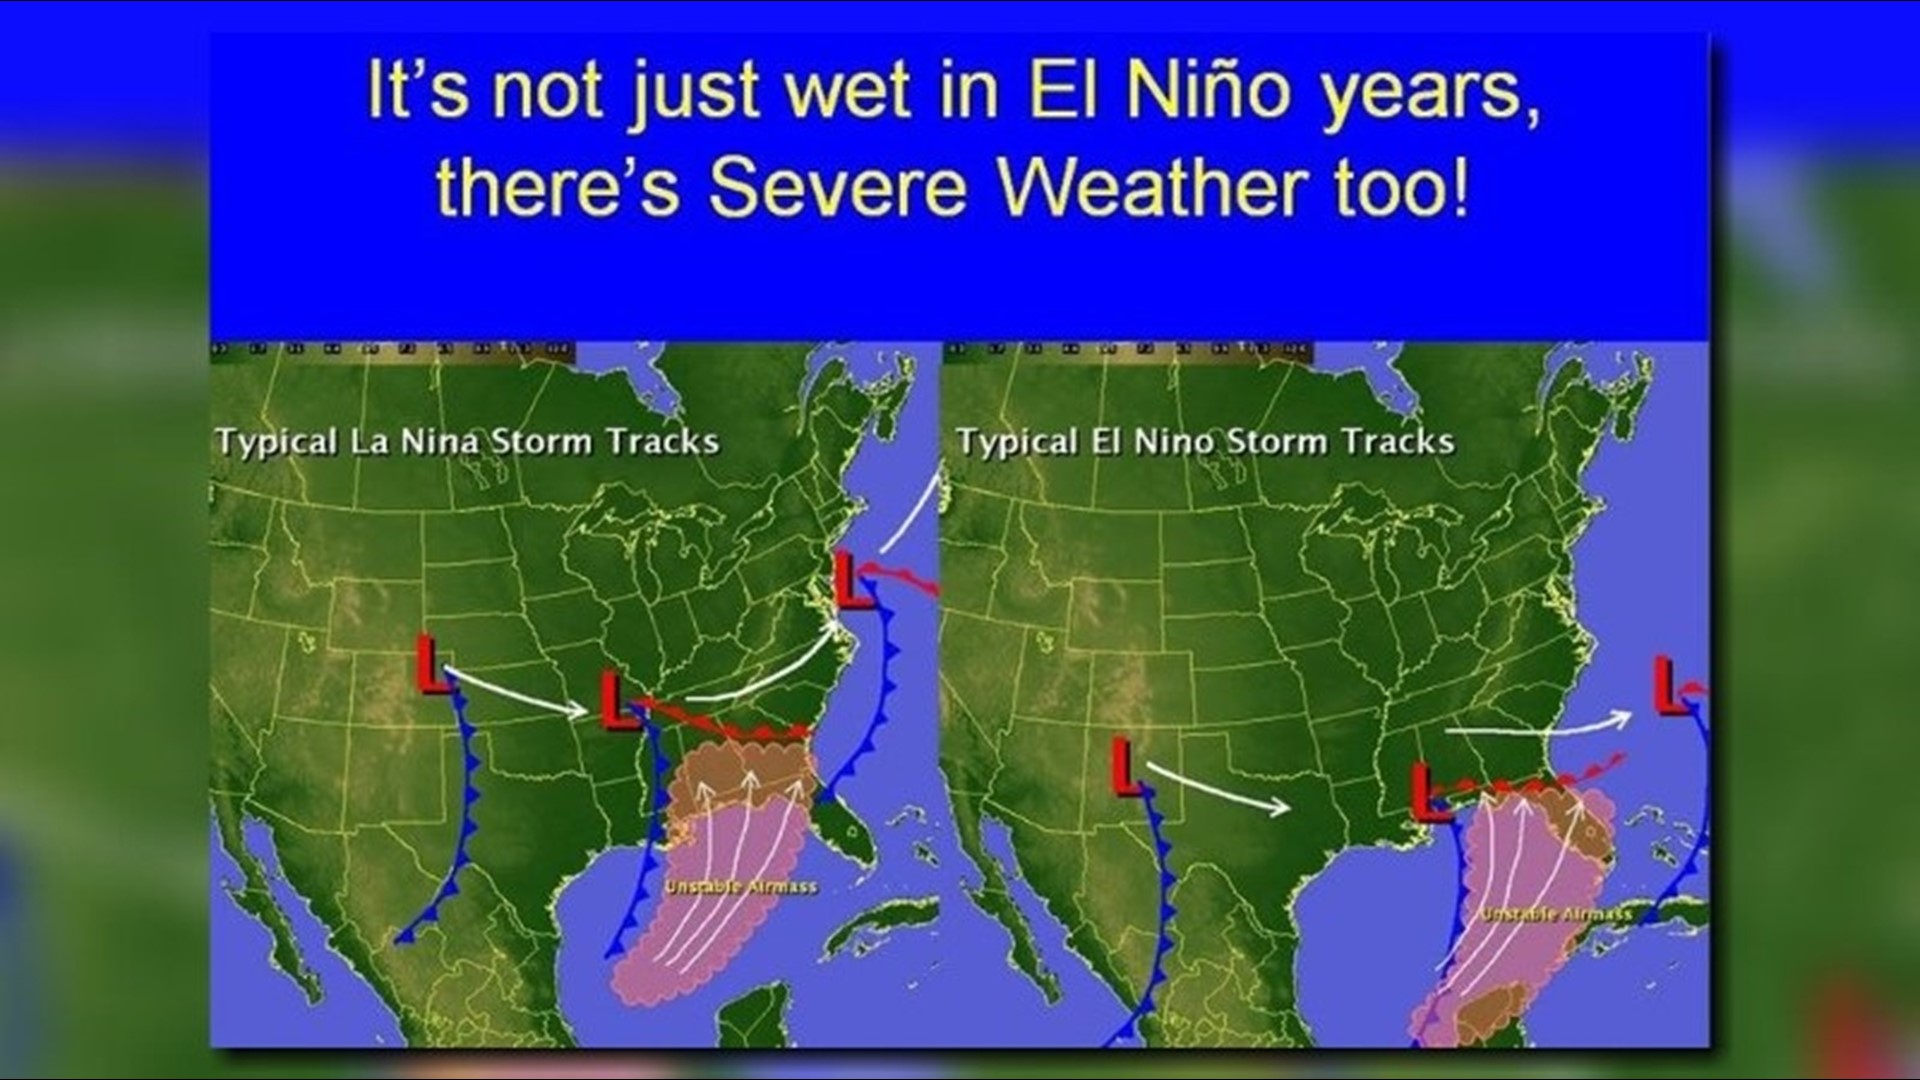 El Niño usually means rainy weather, and more severe storms, for